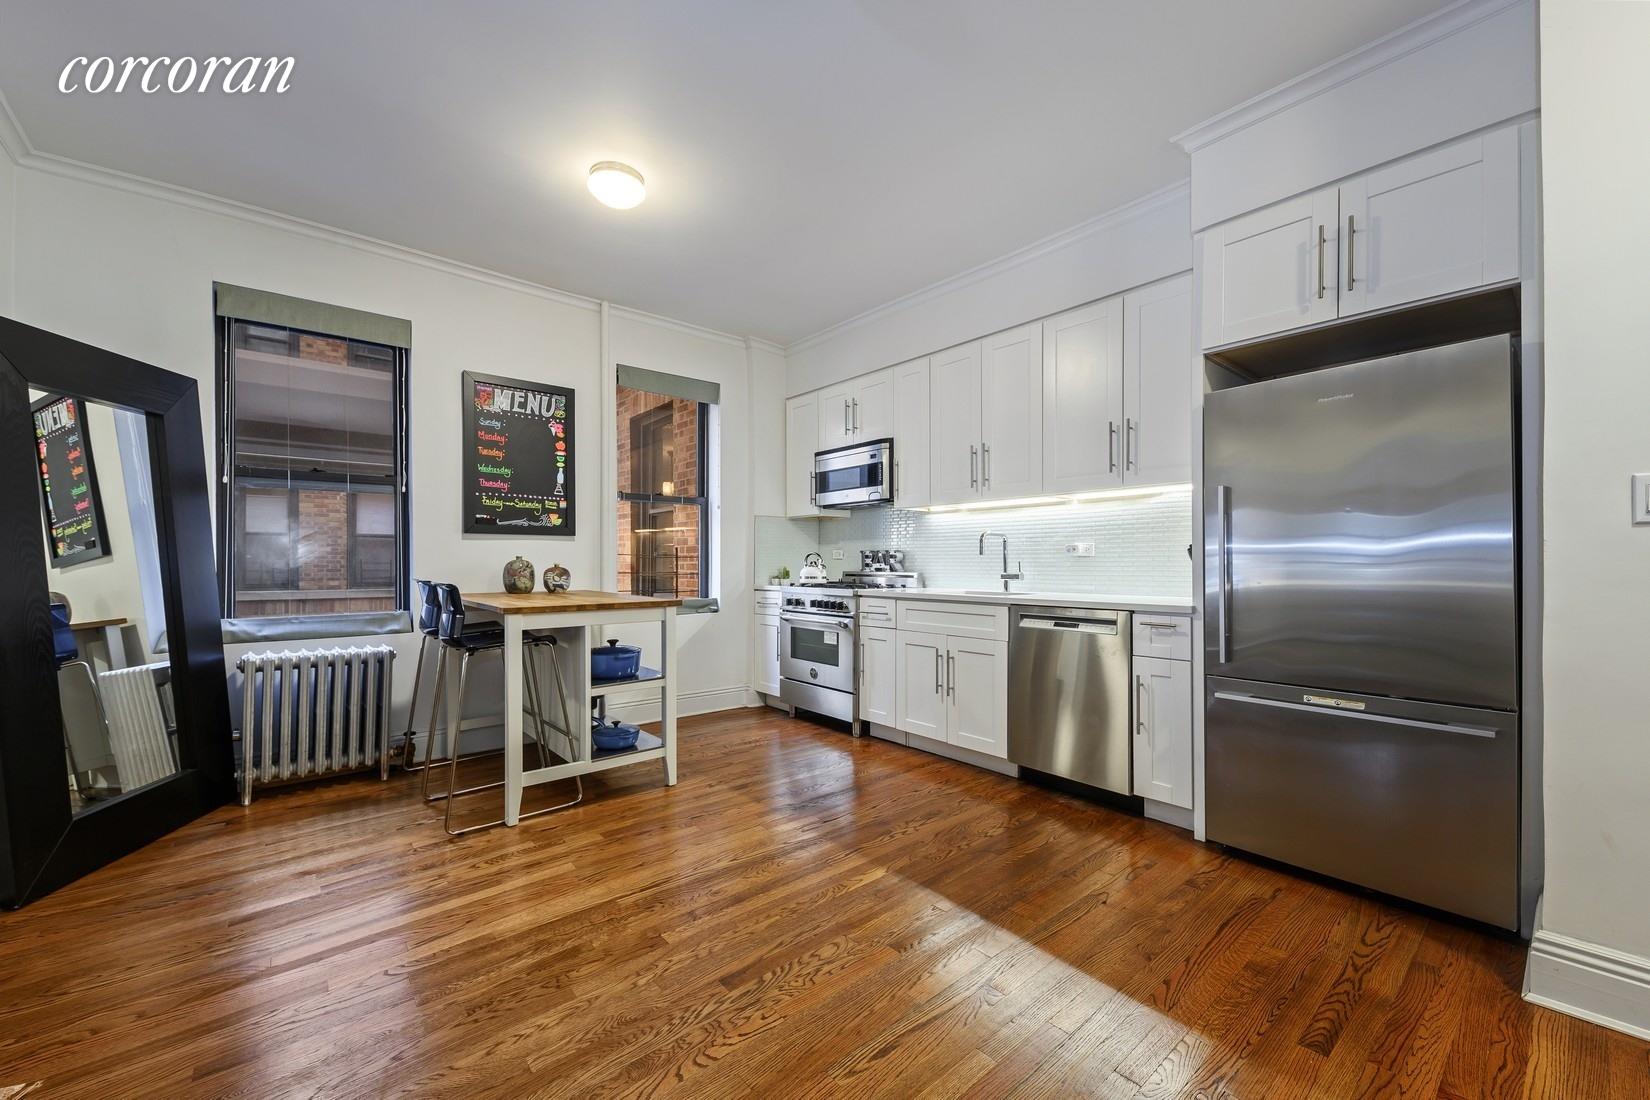 a kitchen with stainless steel appliances a refrigerator sink and wooden floor